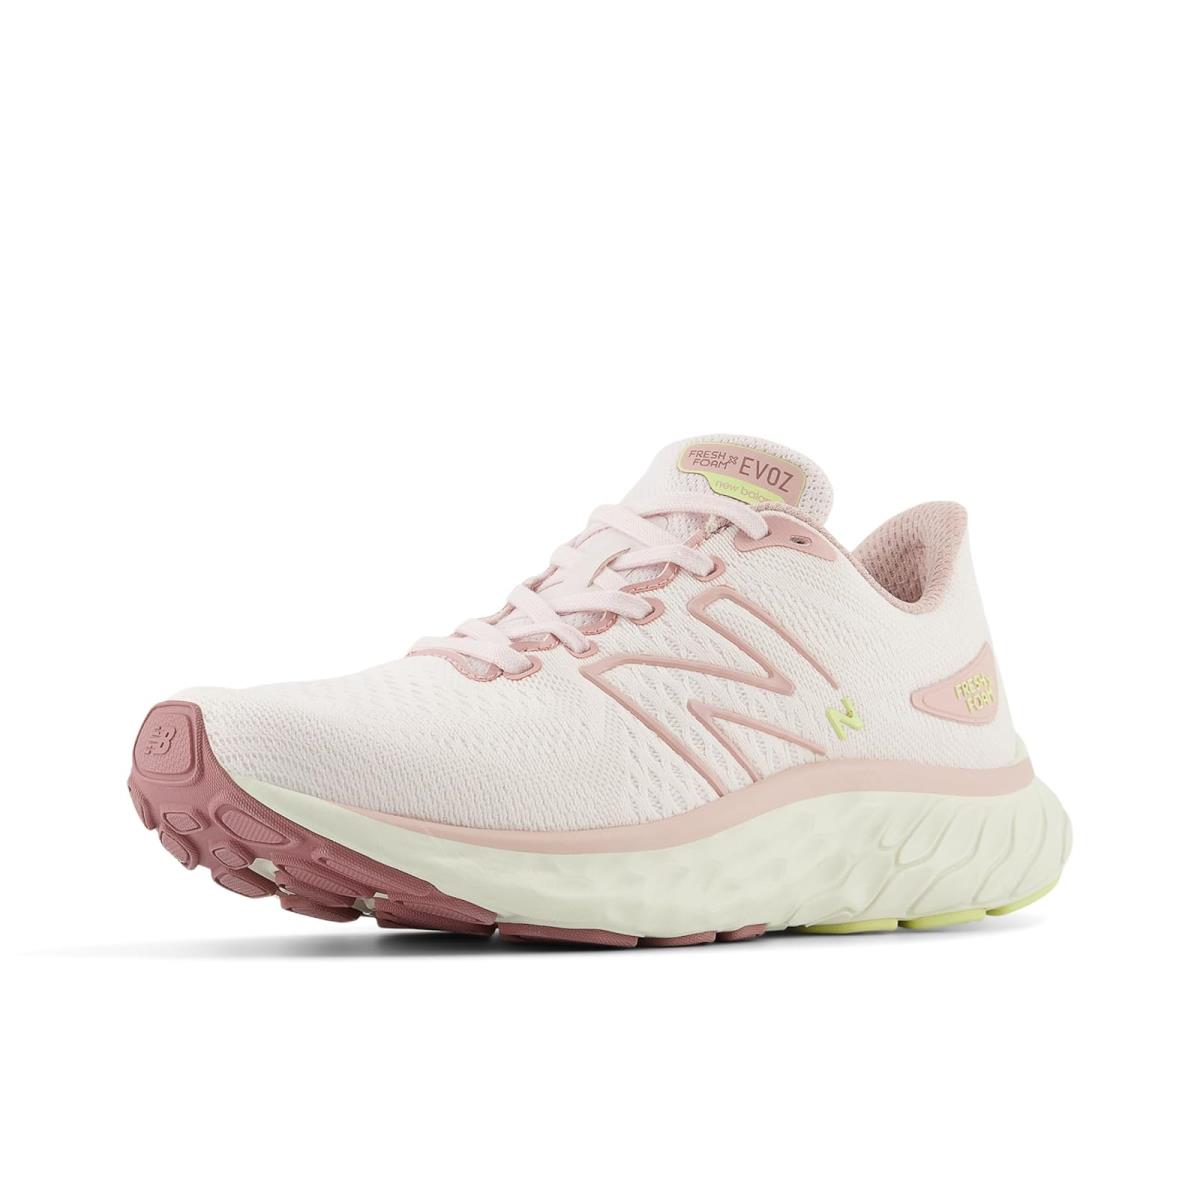 Woman`s Sneakers Athletic Shoes New Balance Fresh Foam X Evoz v3 Orb Pink/Rosewood